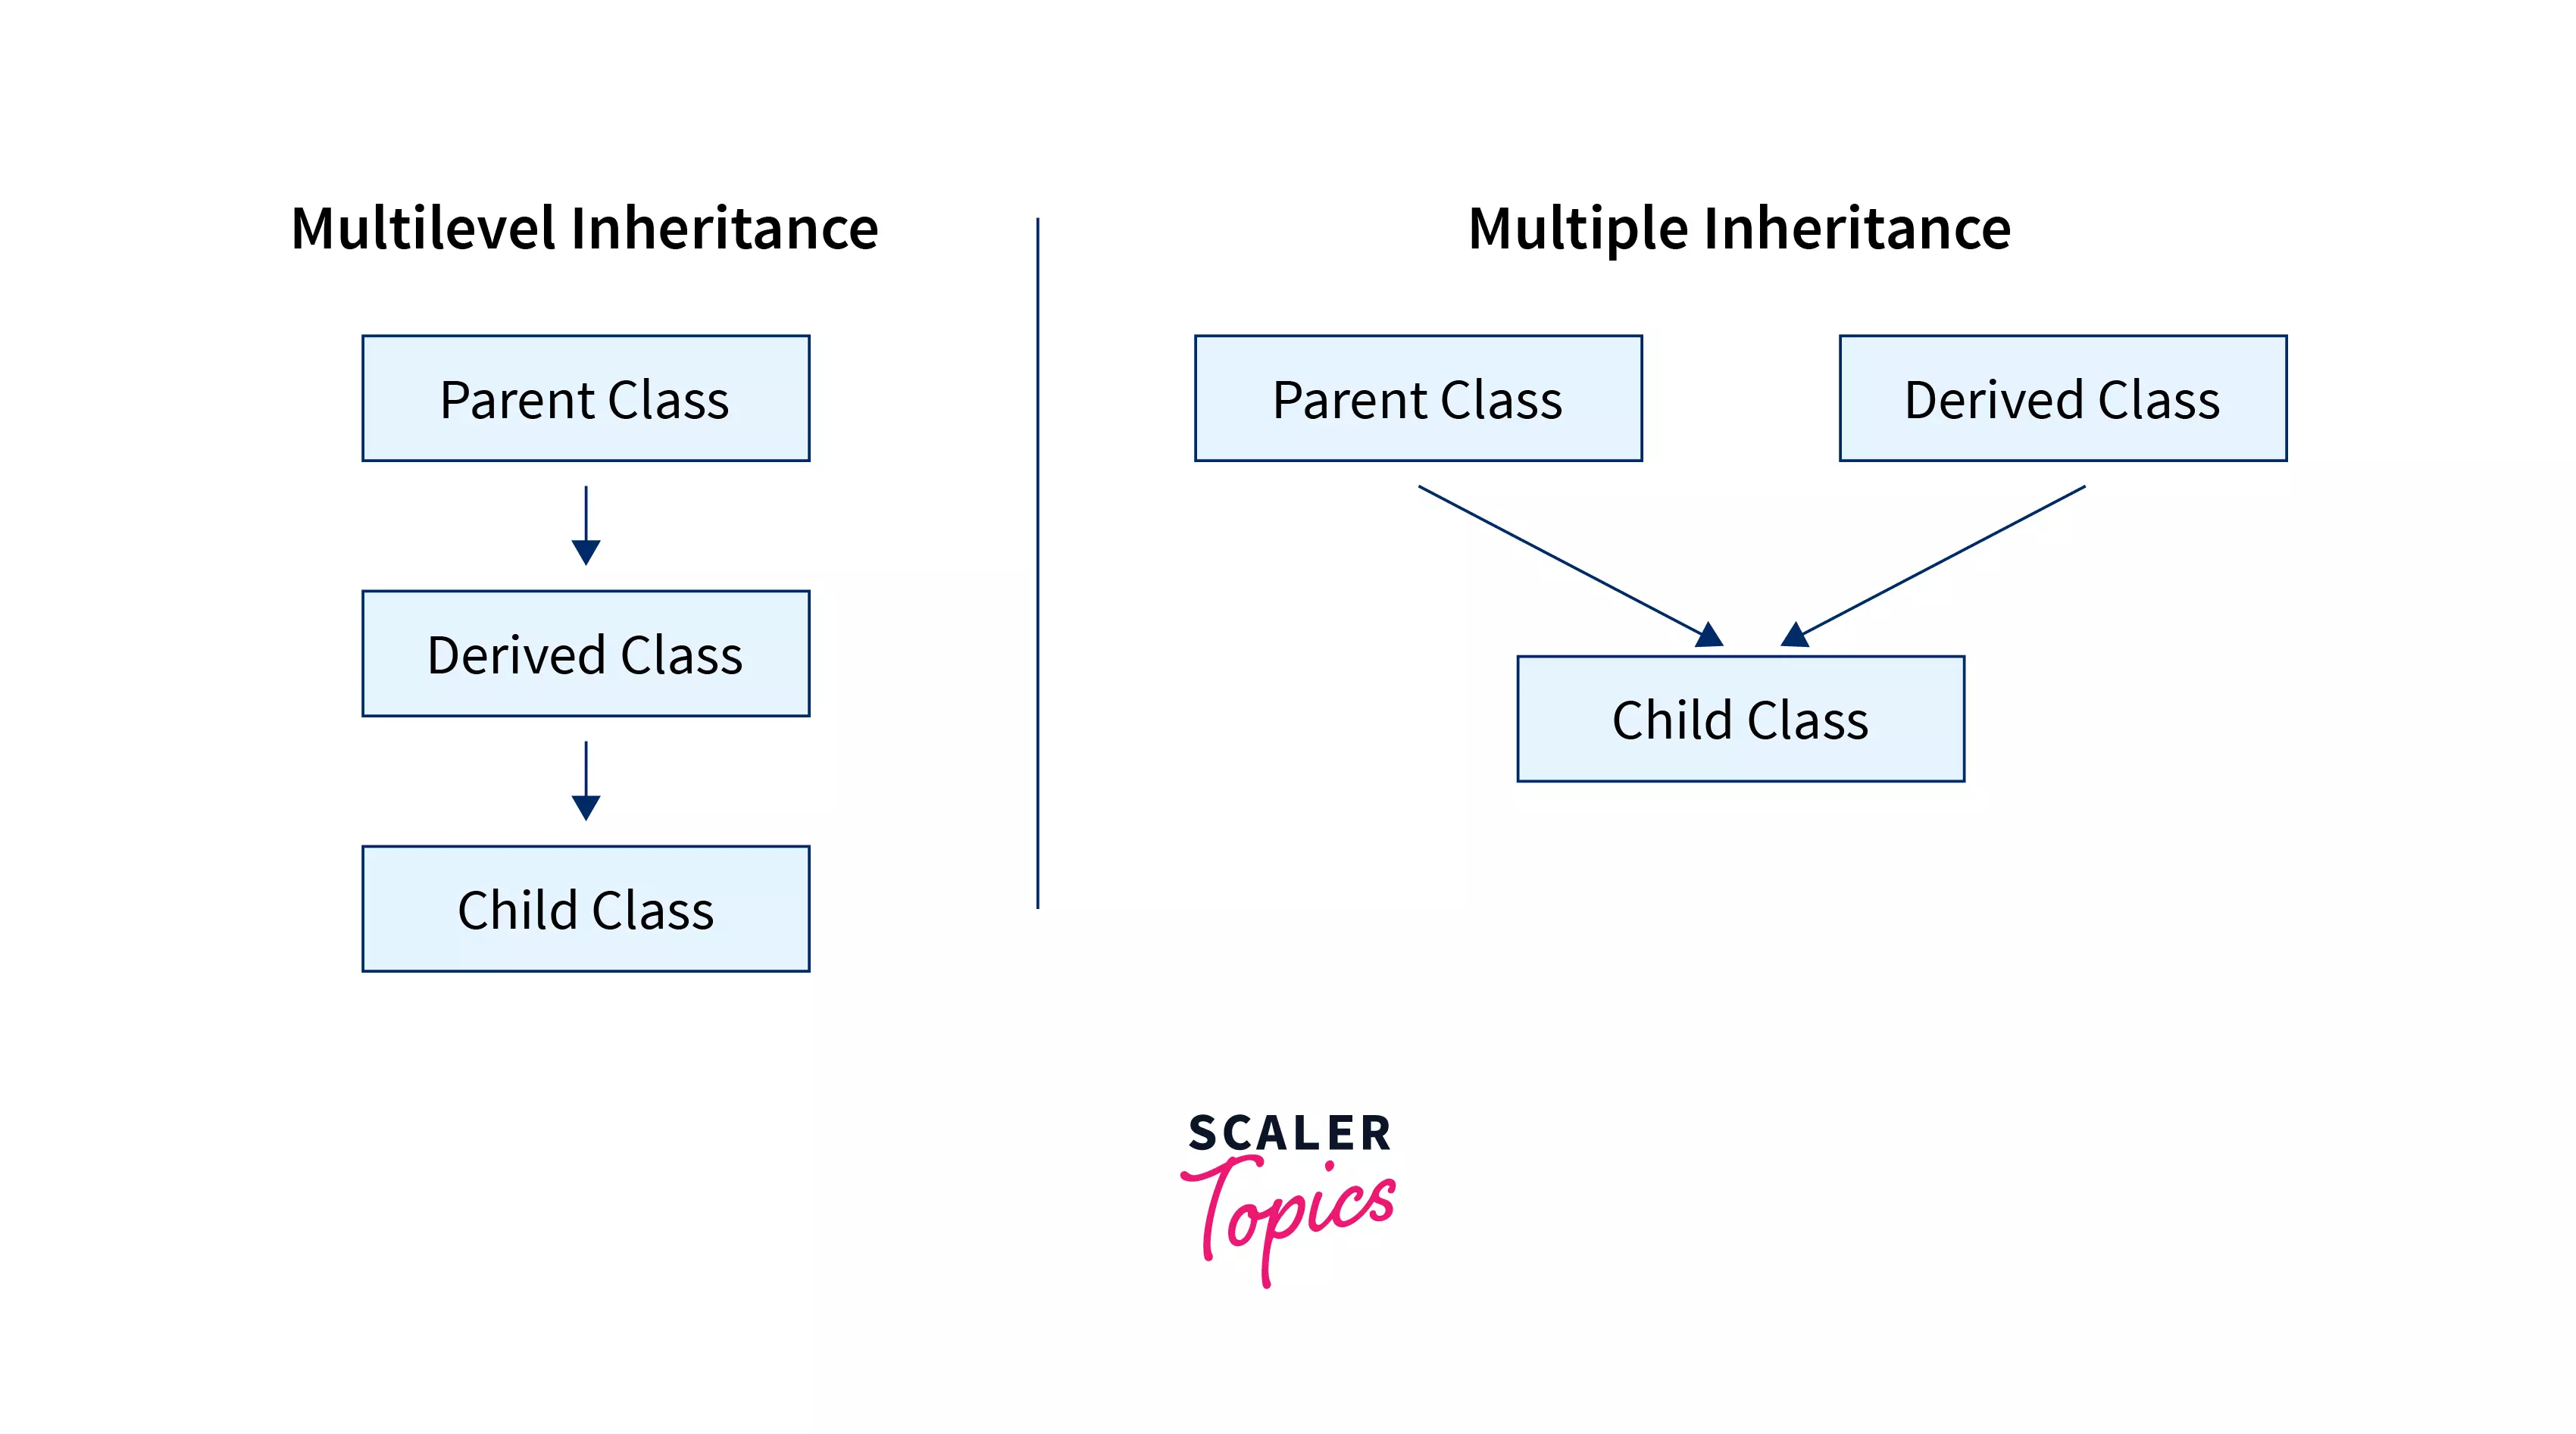 Difference Between Multilevel and Multiple Inheritance in C++